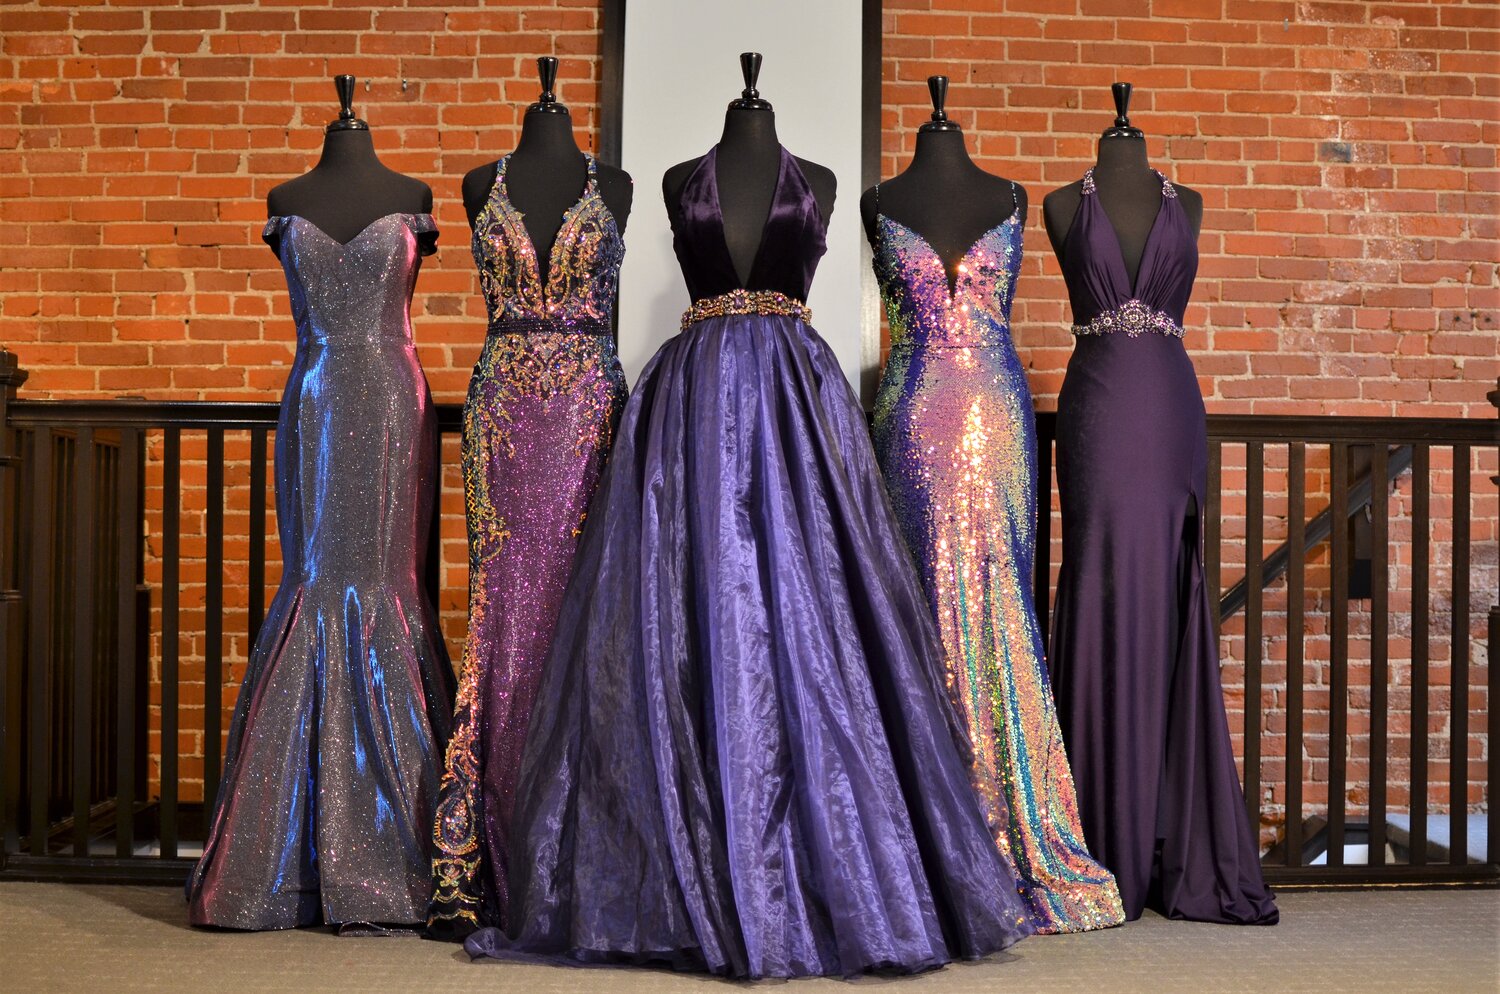 5 different purple pageant dresses from inside the store on mannequins.